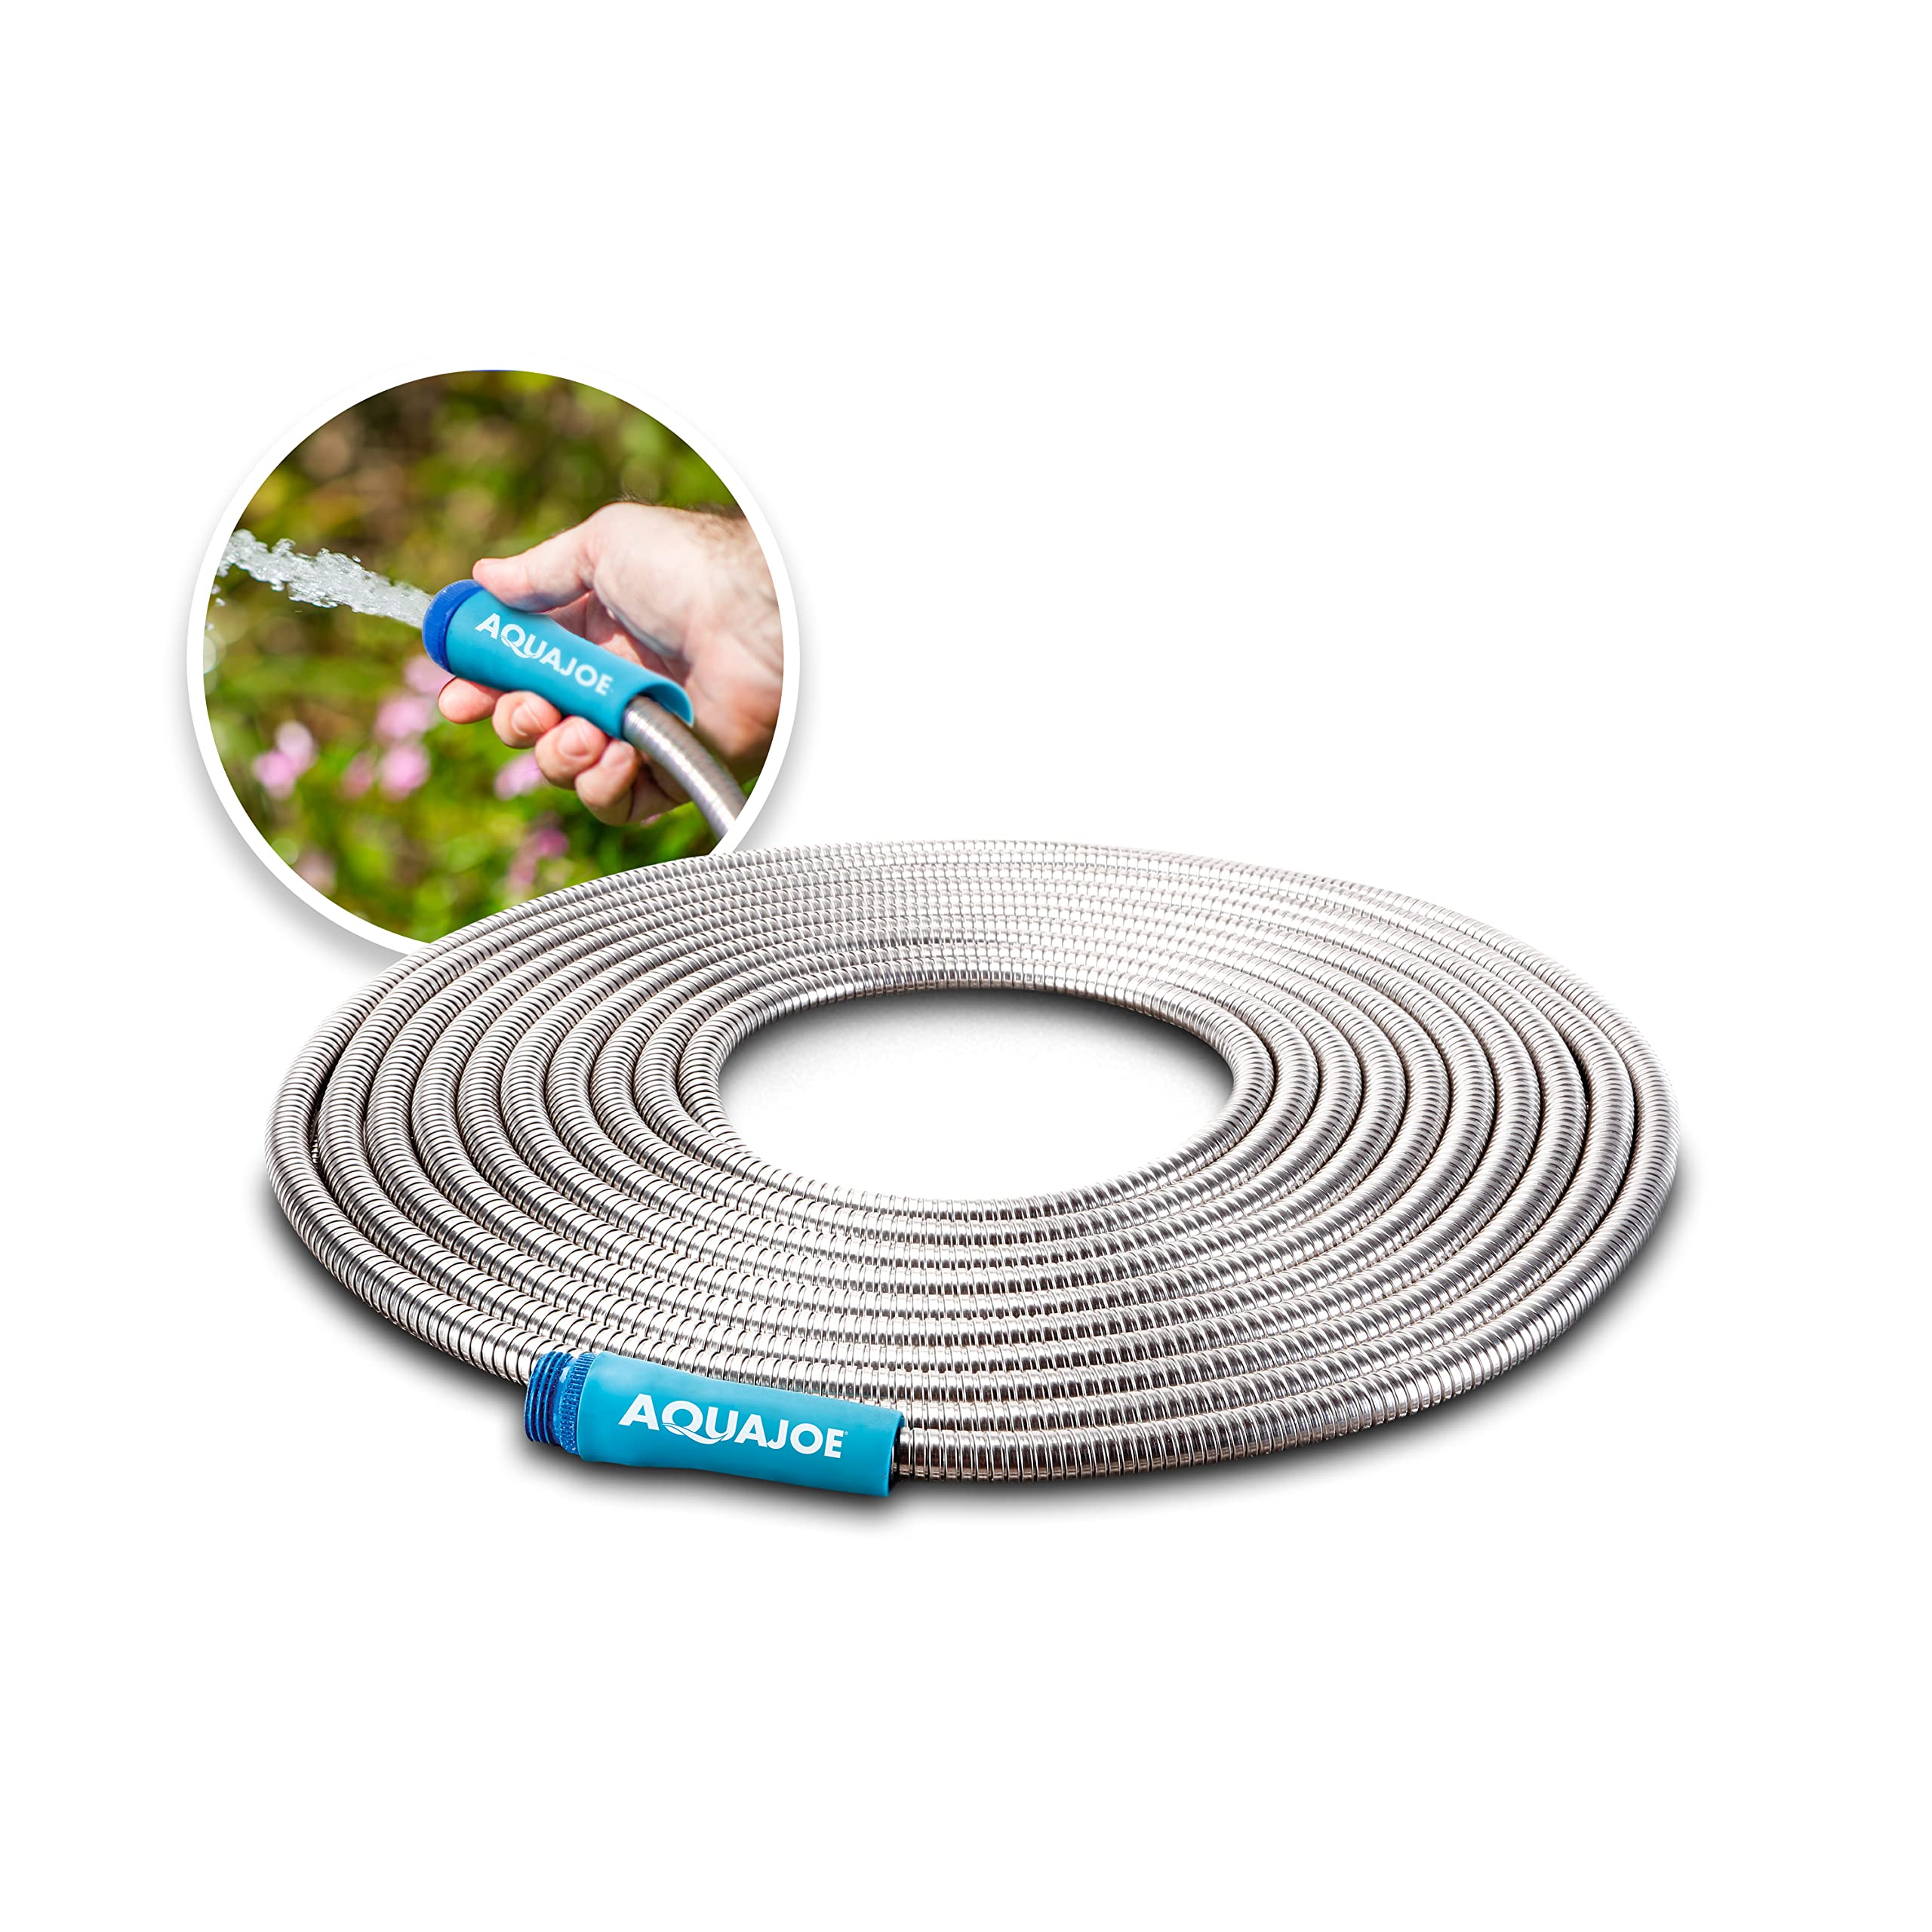 25-Ft Aqua Joe AJSGH25 Stainless Steel Metal Garden Hose $10 + Free Shipping w/ Prime or on $35+